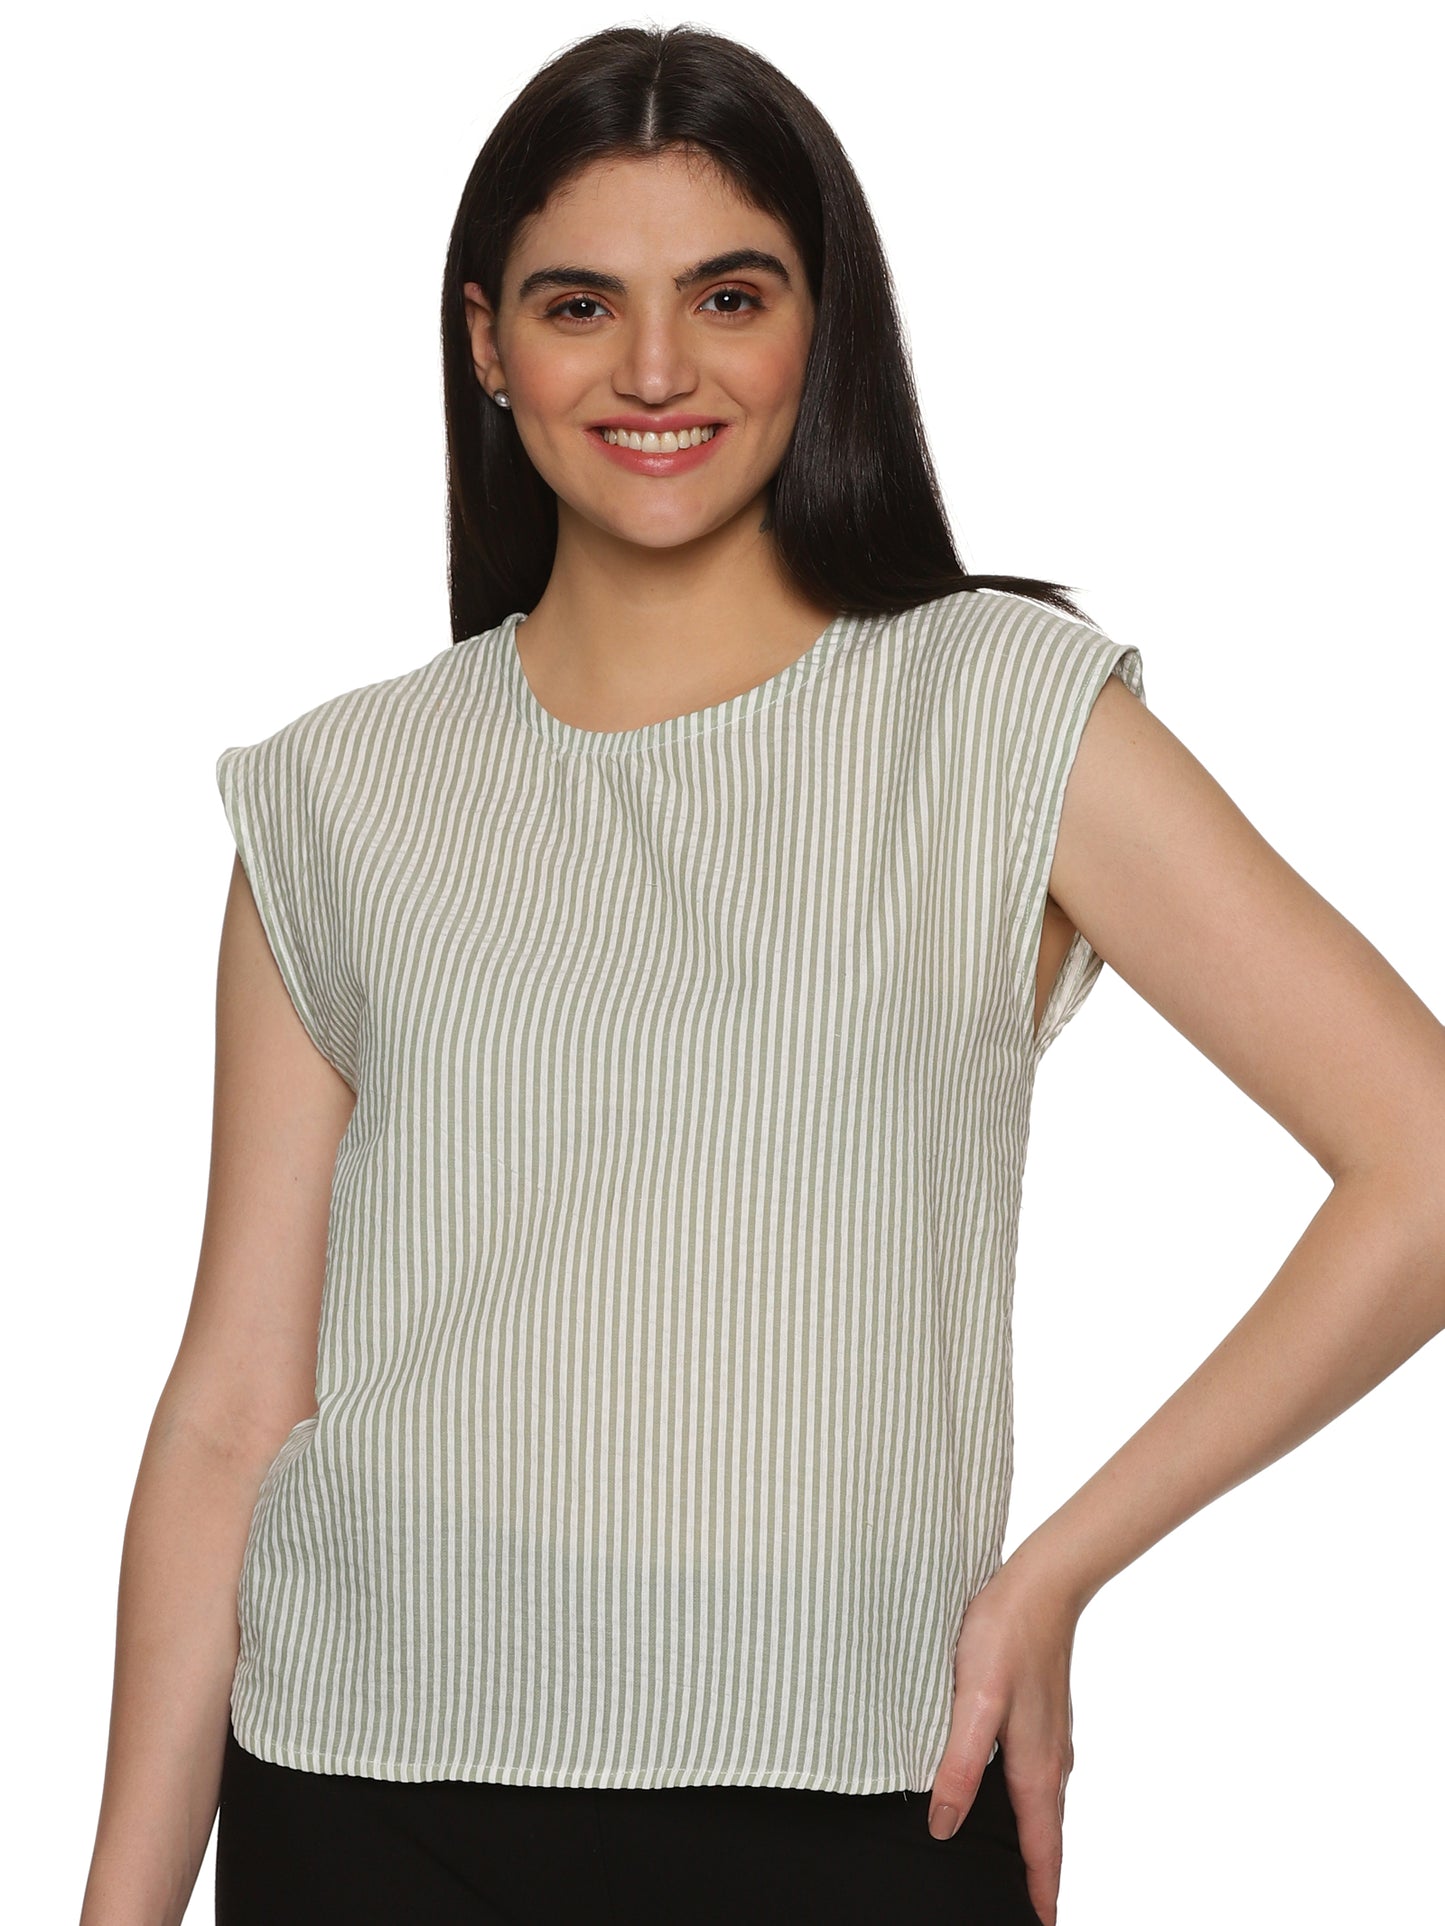 A model in Cotton Drop Shoulder vertical striped Top, a womens workwear is standing against a white background